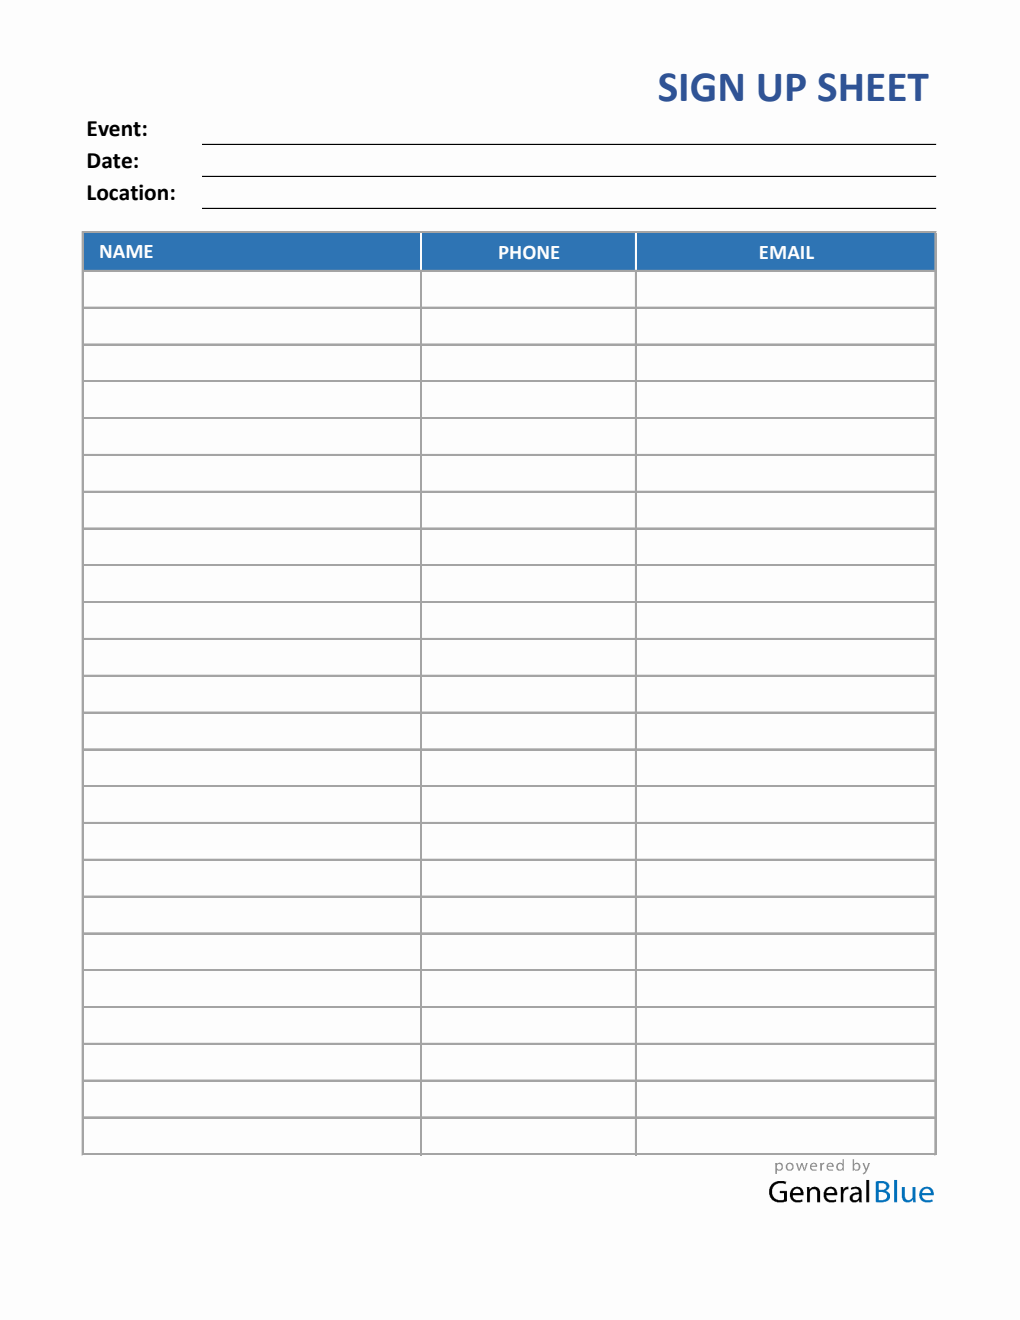 Event Sign Up Sheet in Excel